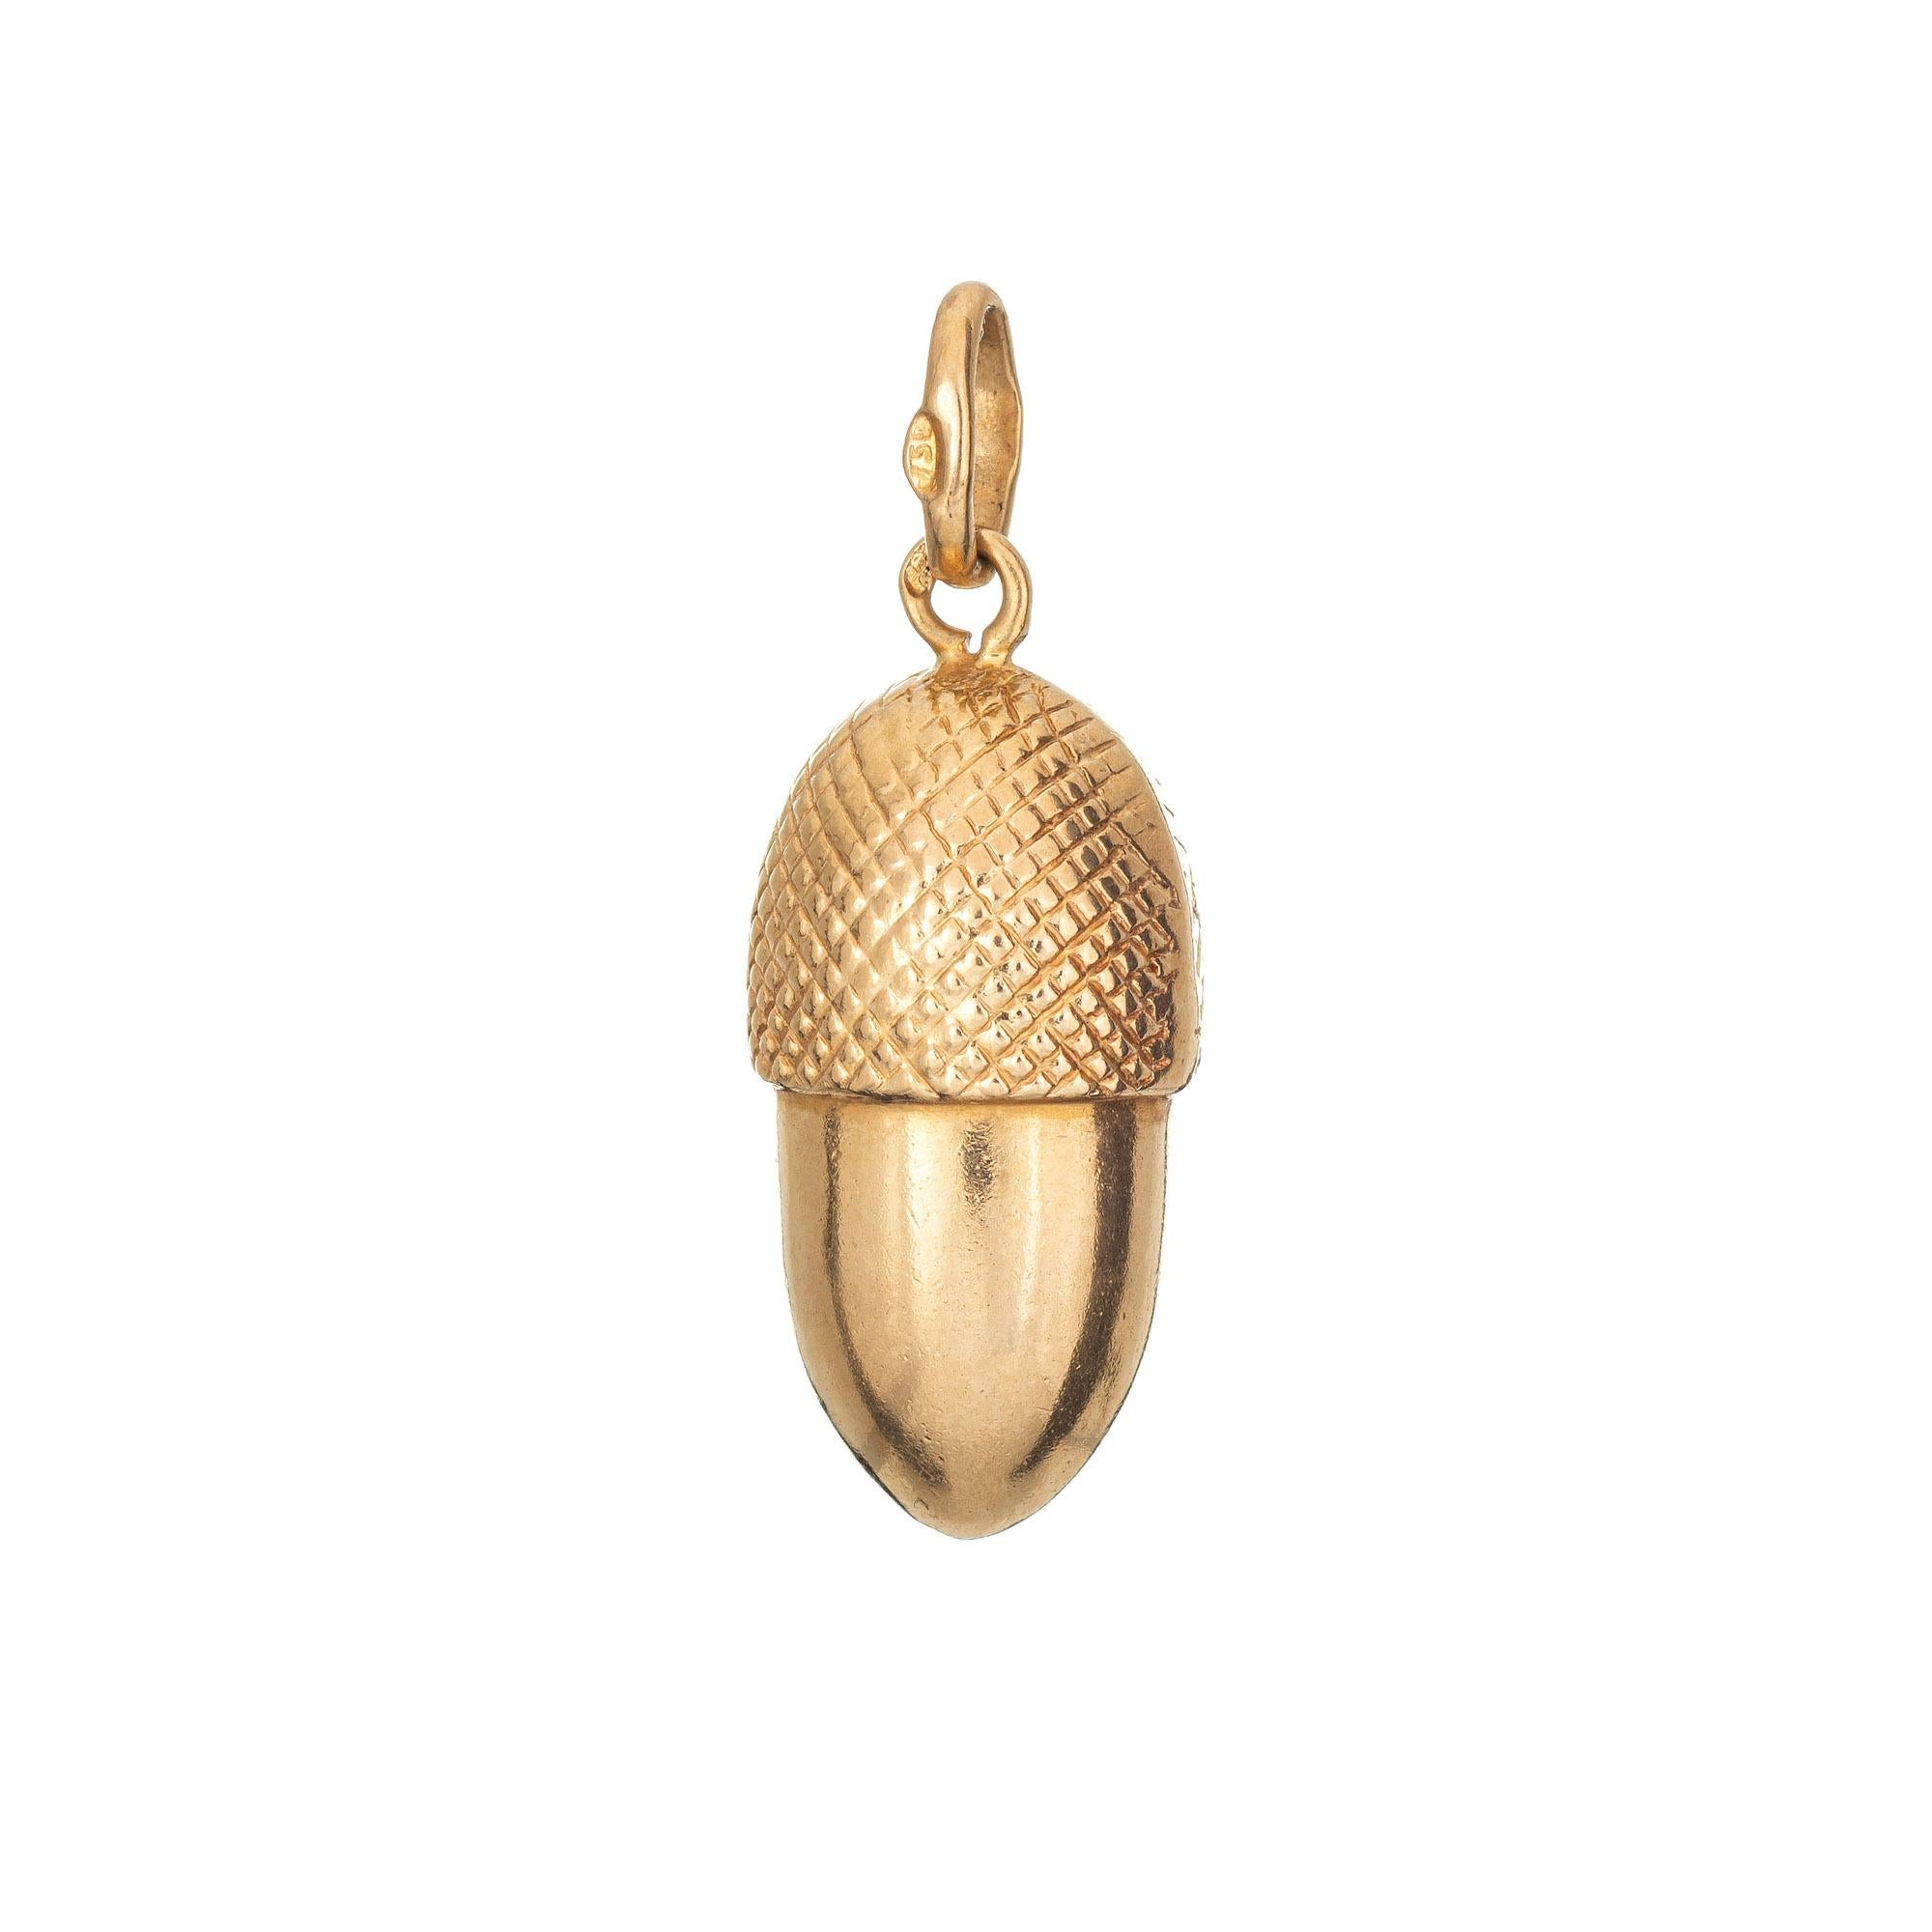 Finely detailed vintage Acorn charm crafted in 18k yellow gold.  

The fruit of the oak tree, the acorn has a smooth nut with a textured cap. The acorn is considered a lucky symbol, representing prosperity and spiritual growth. The bale measures 3mm